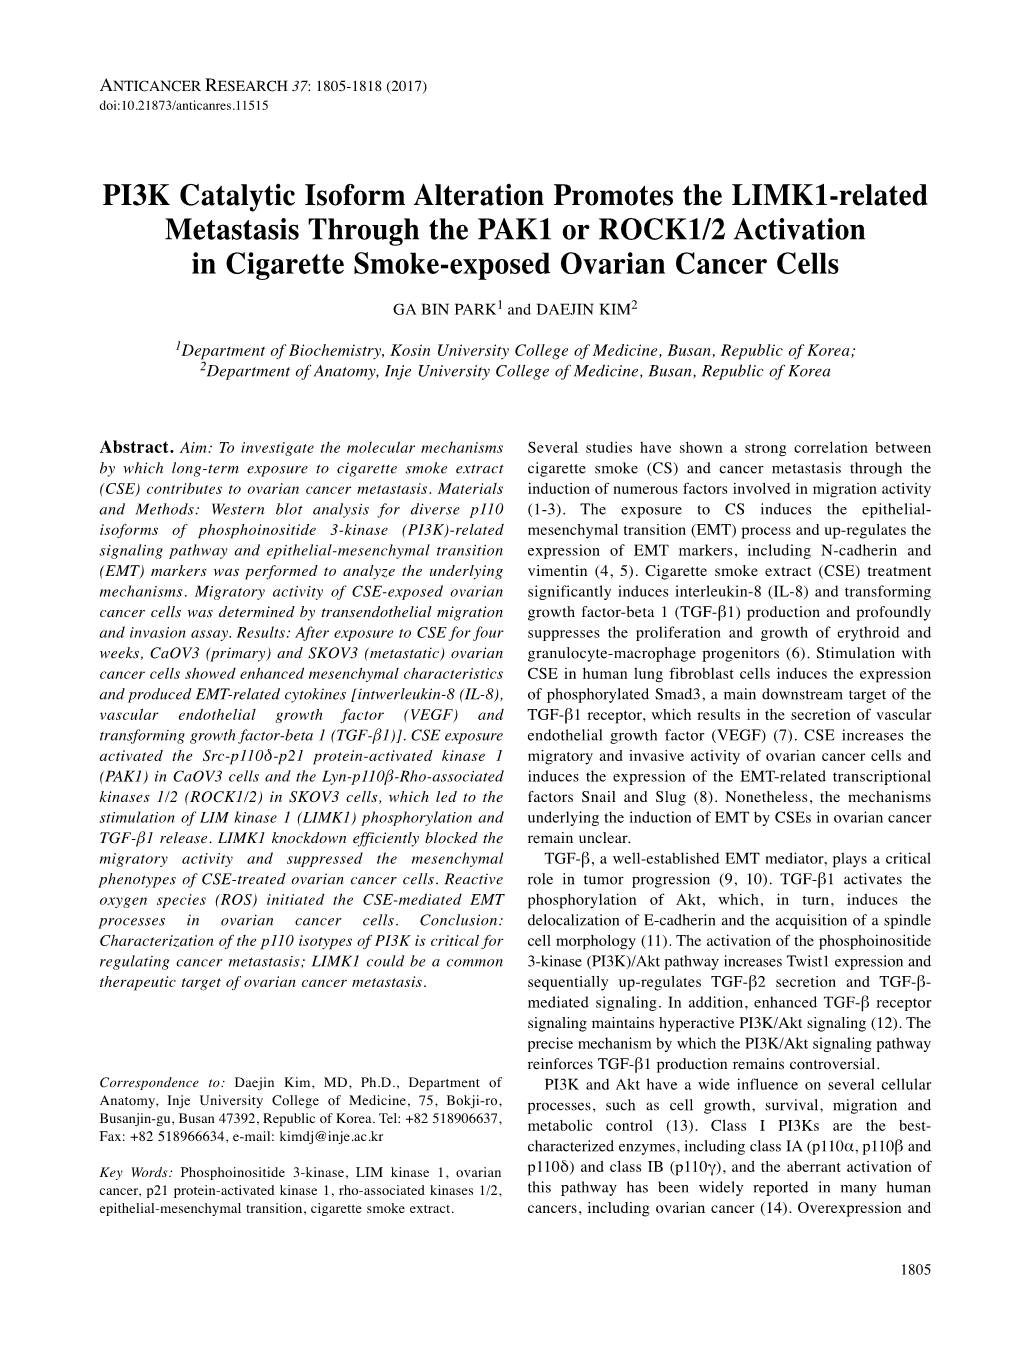 PI3K Catalytic Isoform Alteration Promotes the LIMK1-Related